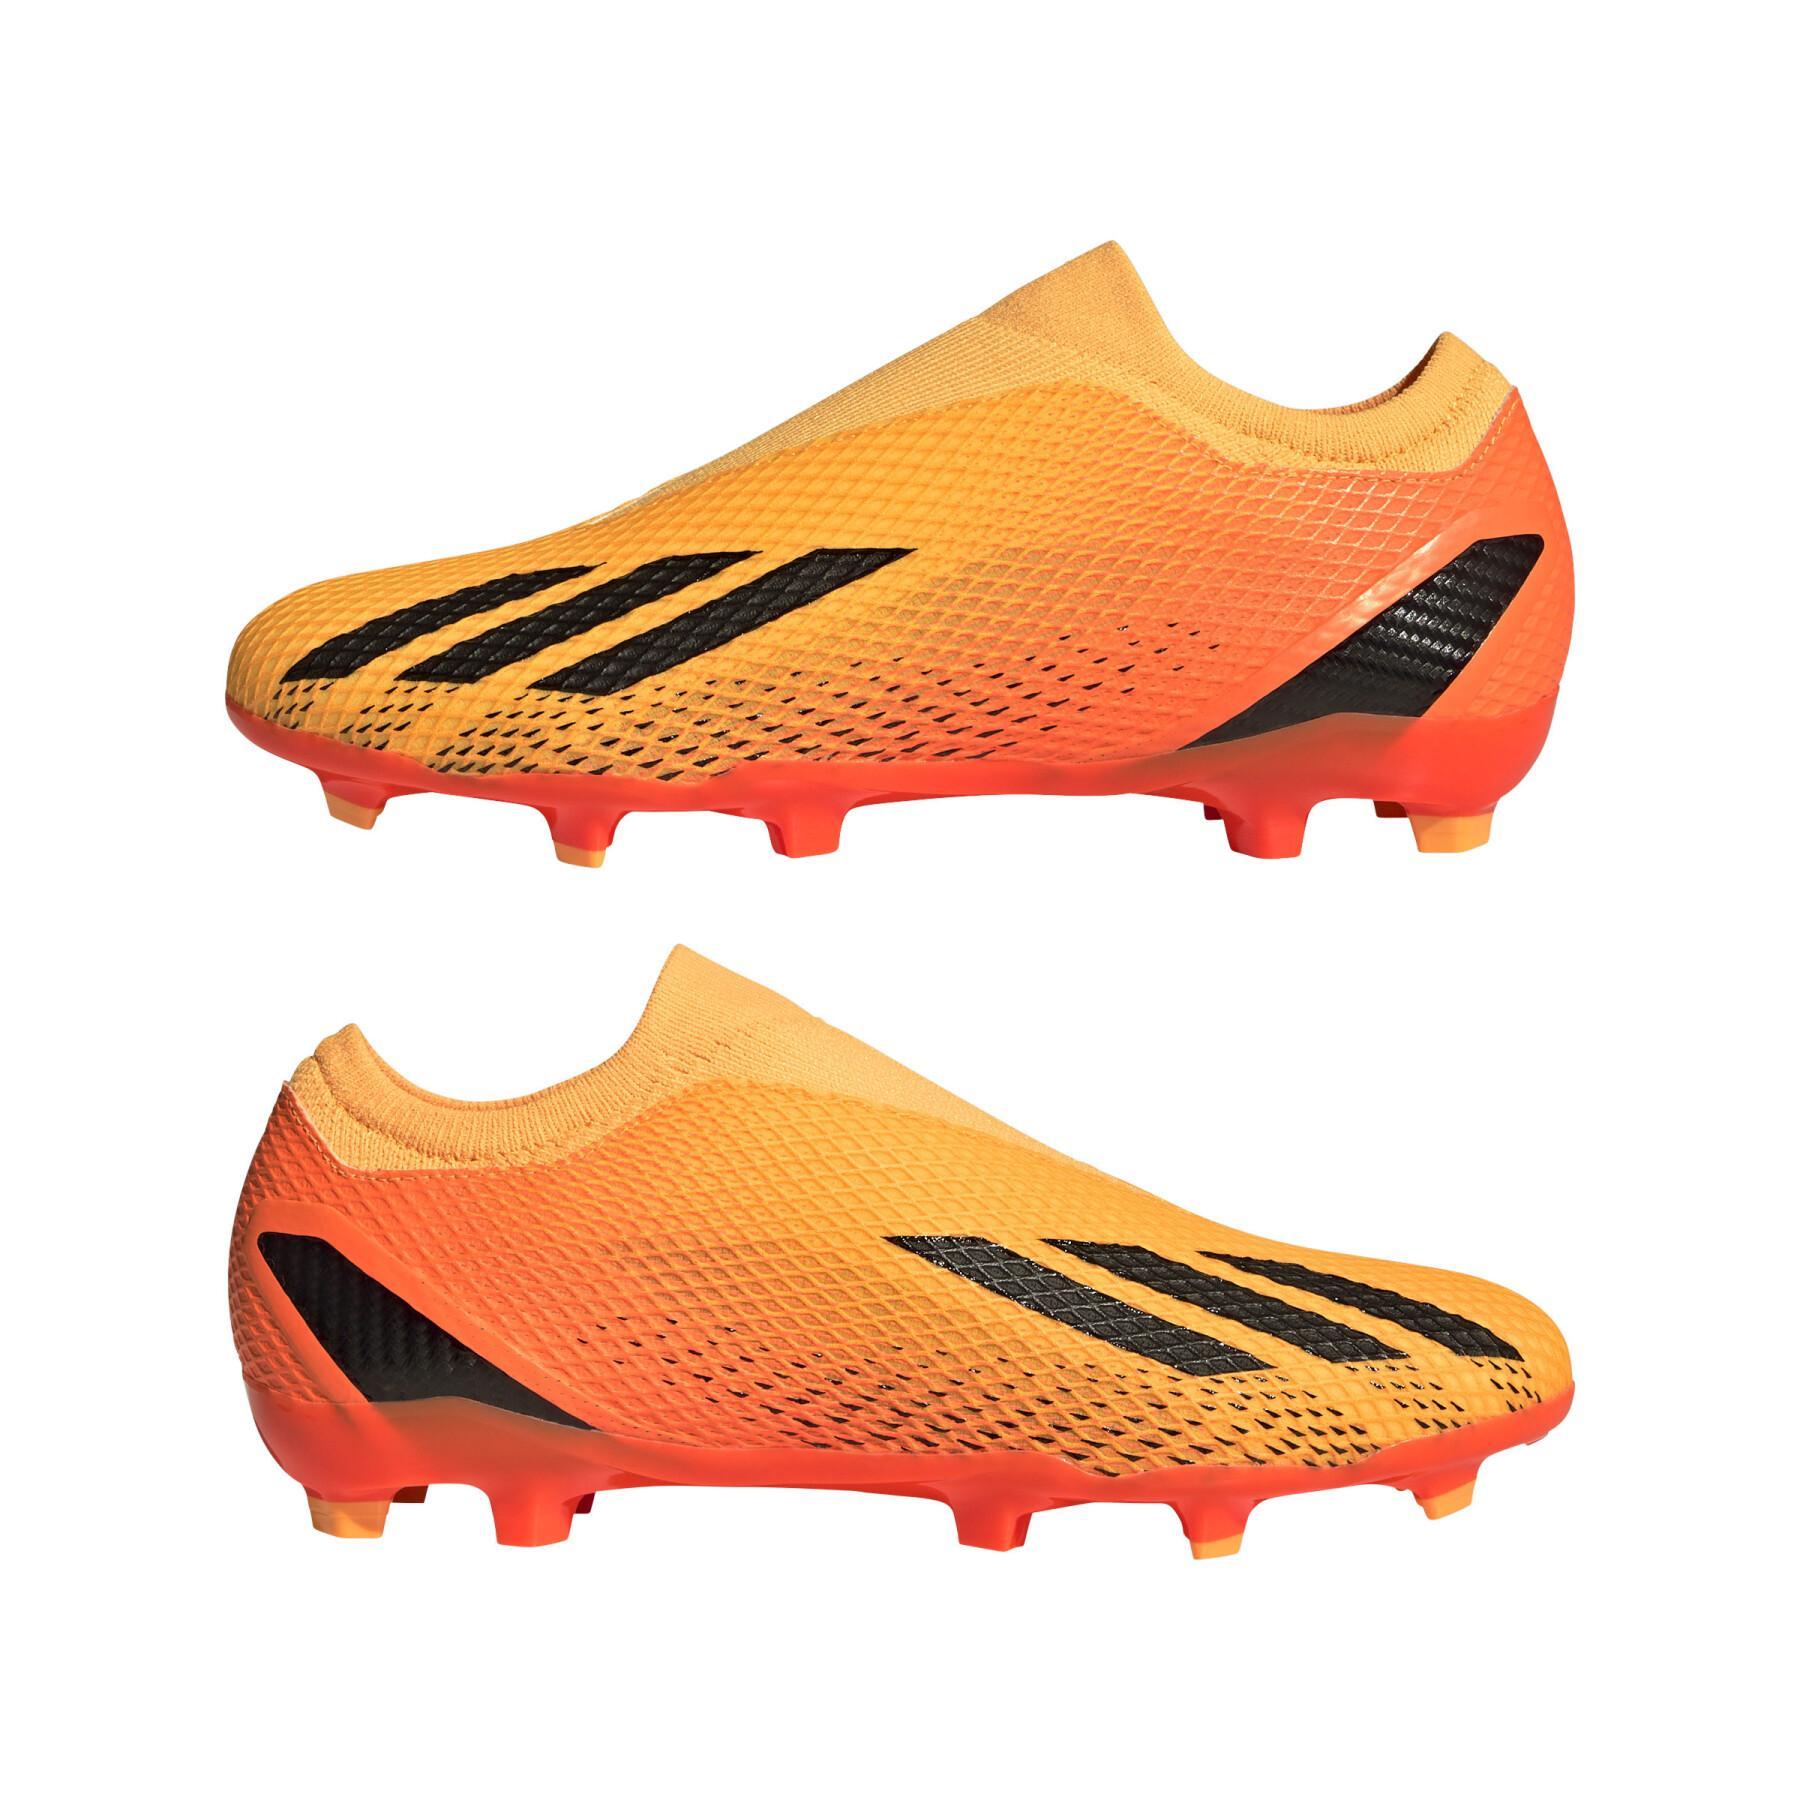 Soccer cleats without laces adidas X Speedportal.3 FG Heatspawn Pack